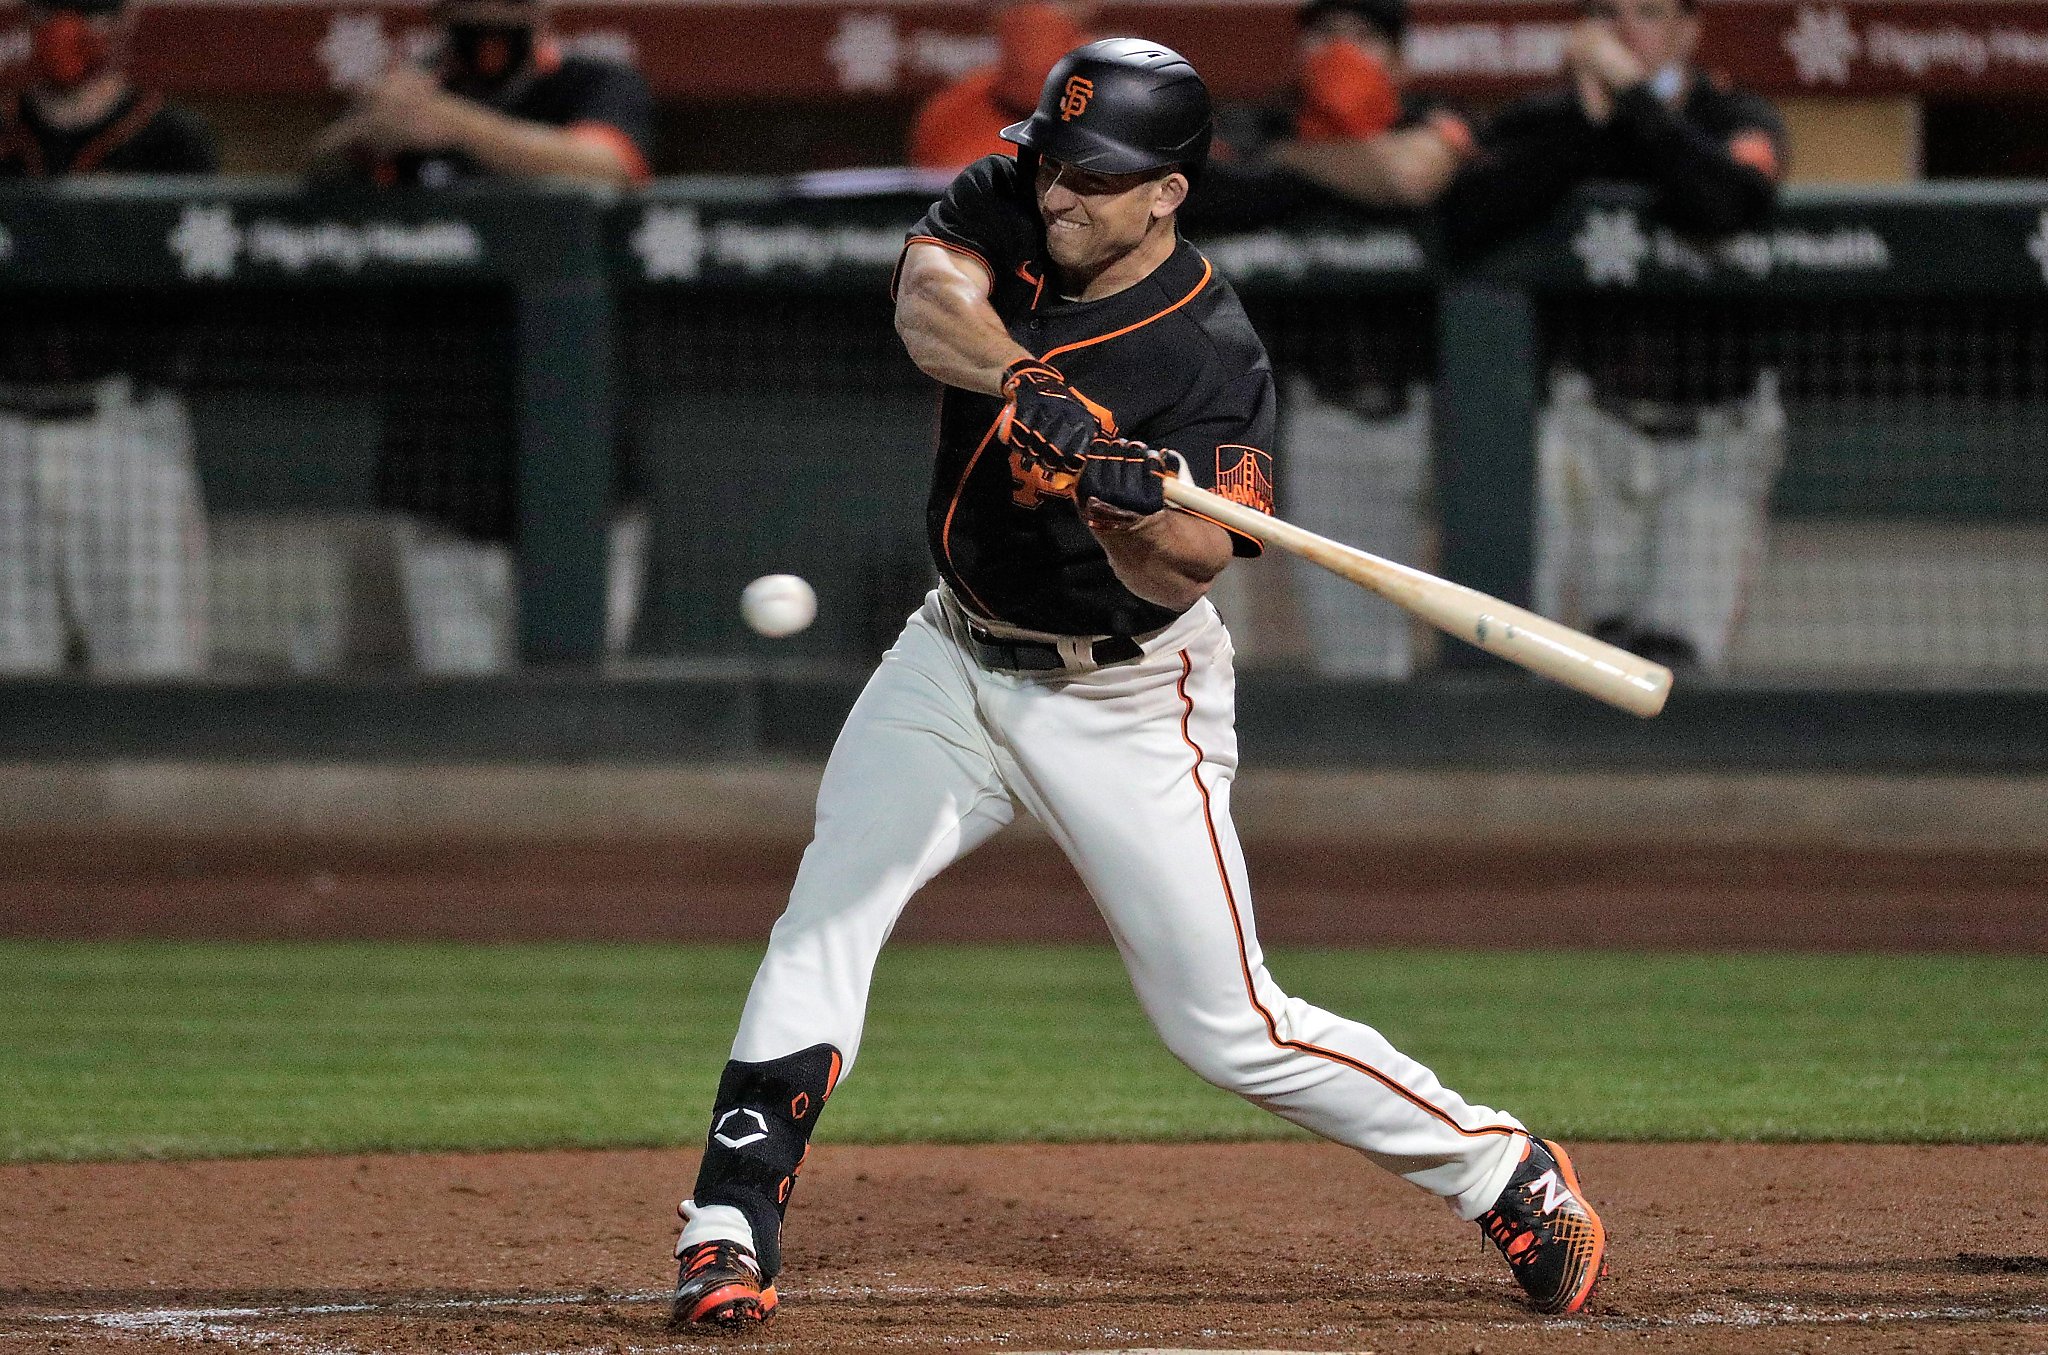 Different buzz' around Buster Posey at Giants camp this year